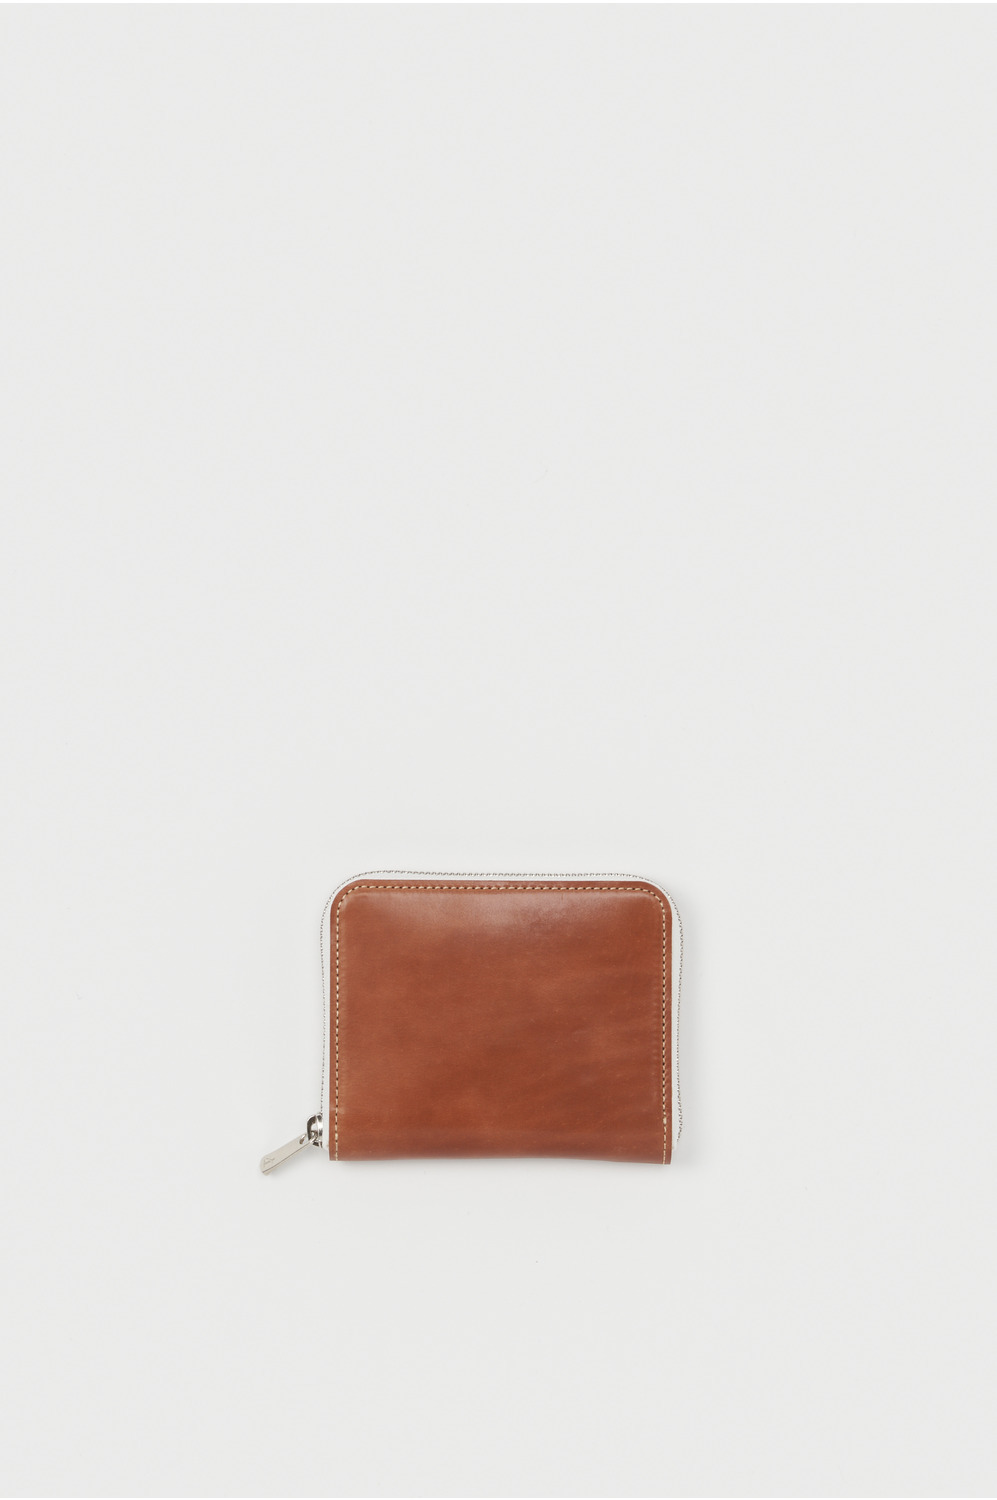 fastened wallet 詳細画像 natural 1